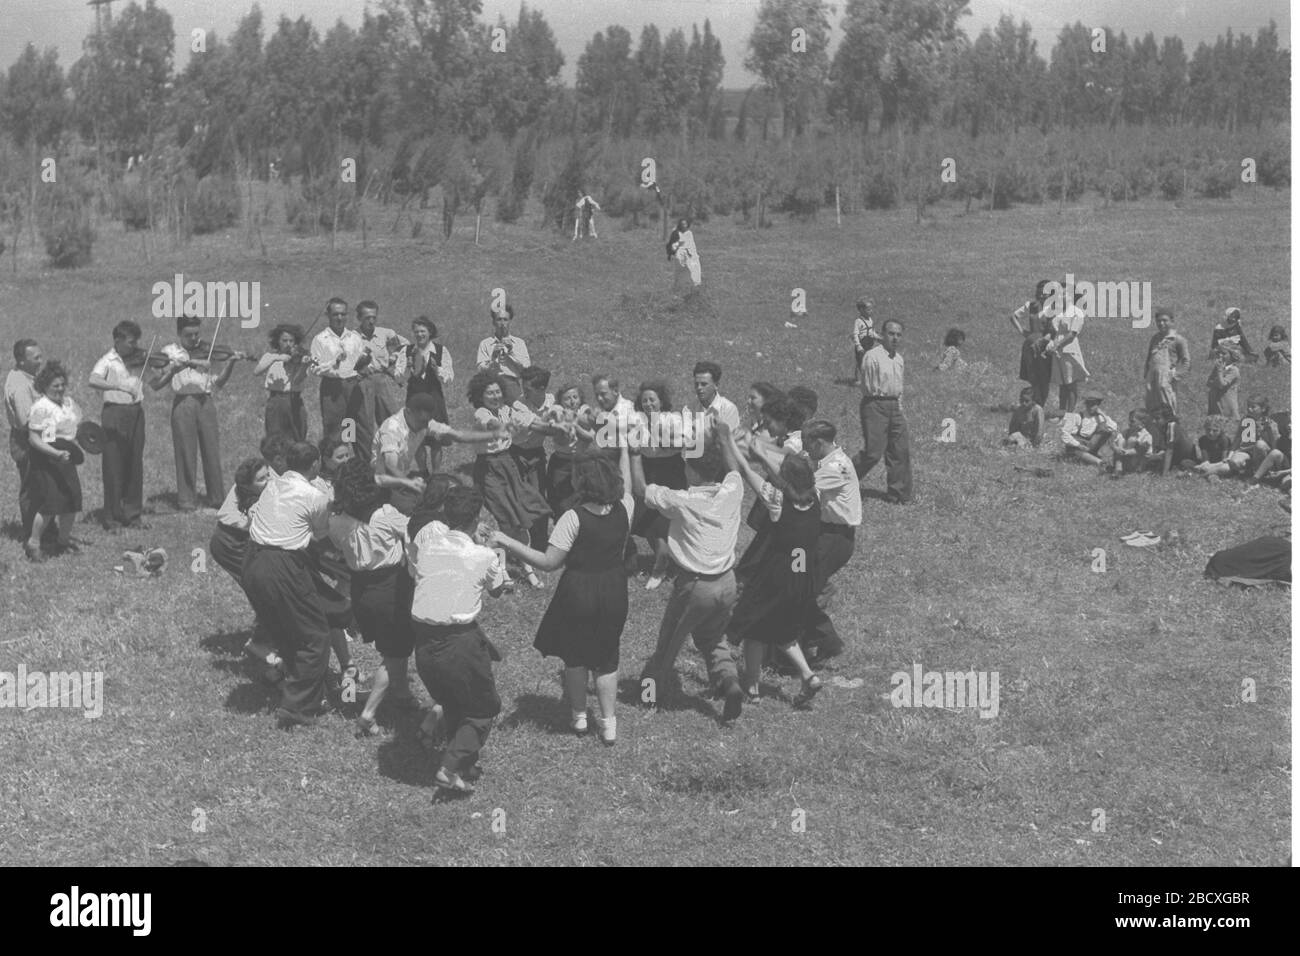 English A Folk Dance Troupe In Kibbutz Dalia U I Ss U O I U U I O I E Ss O E I I U O I 01 05 1945 This Is Available From National Photo Collection Of Israel Photography Dept Goverment Press Office Link Under